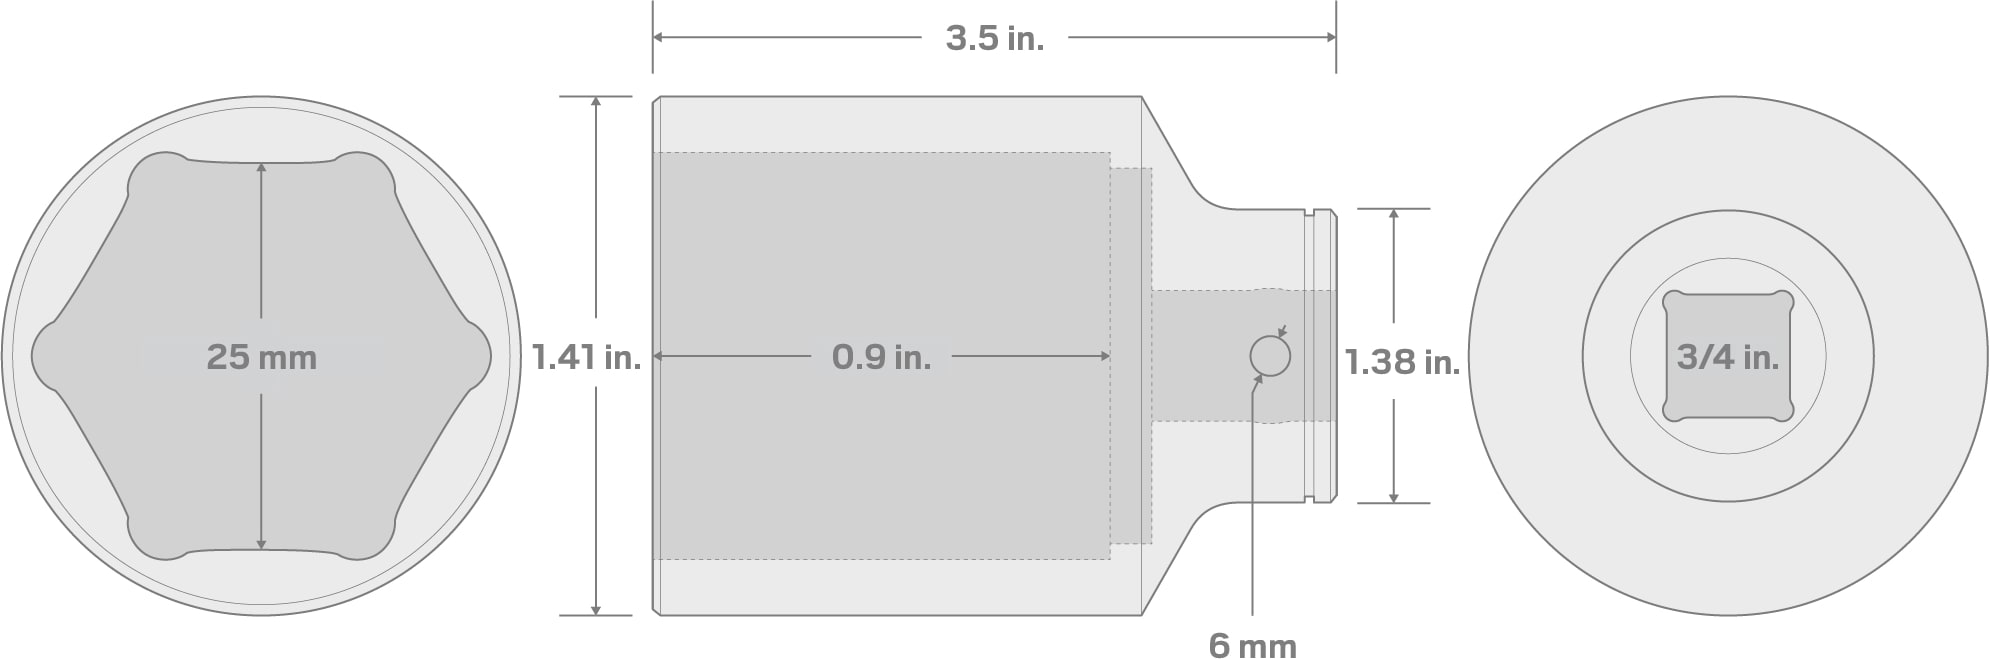 Specs for 3/4 Inch Drive x 25 mm Deep 6-Point Socket